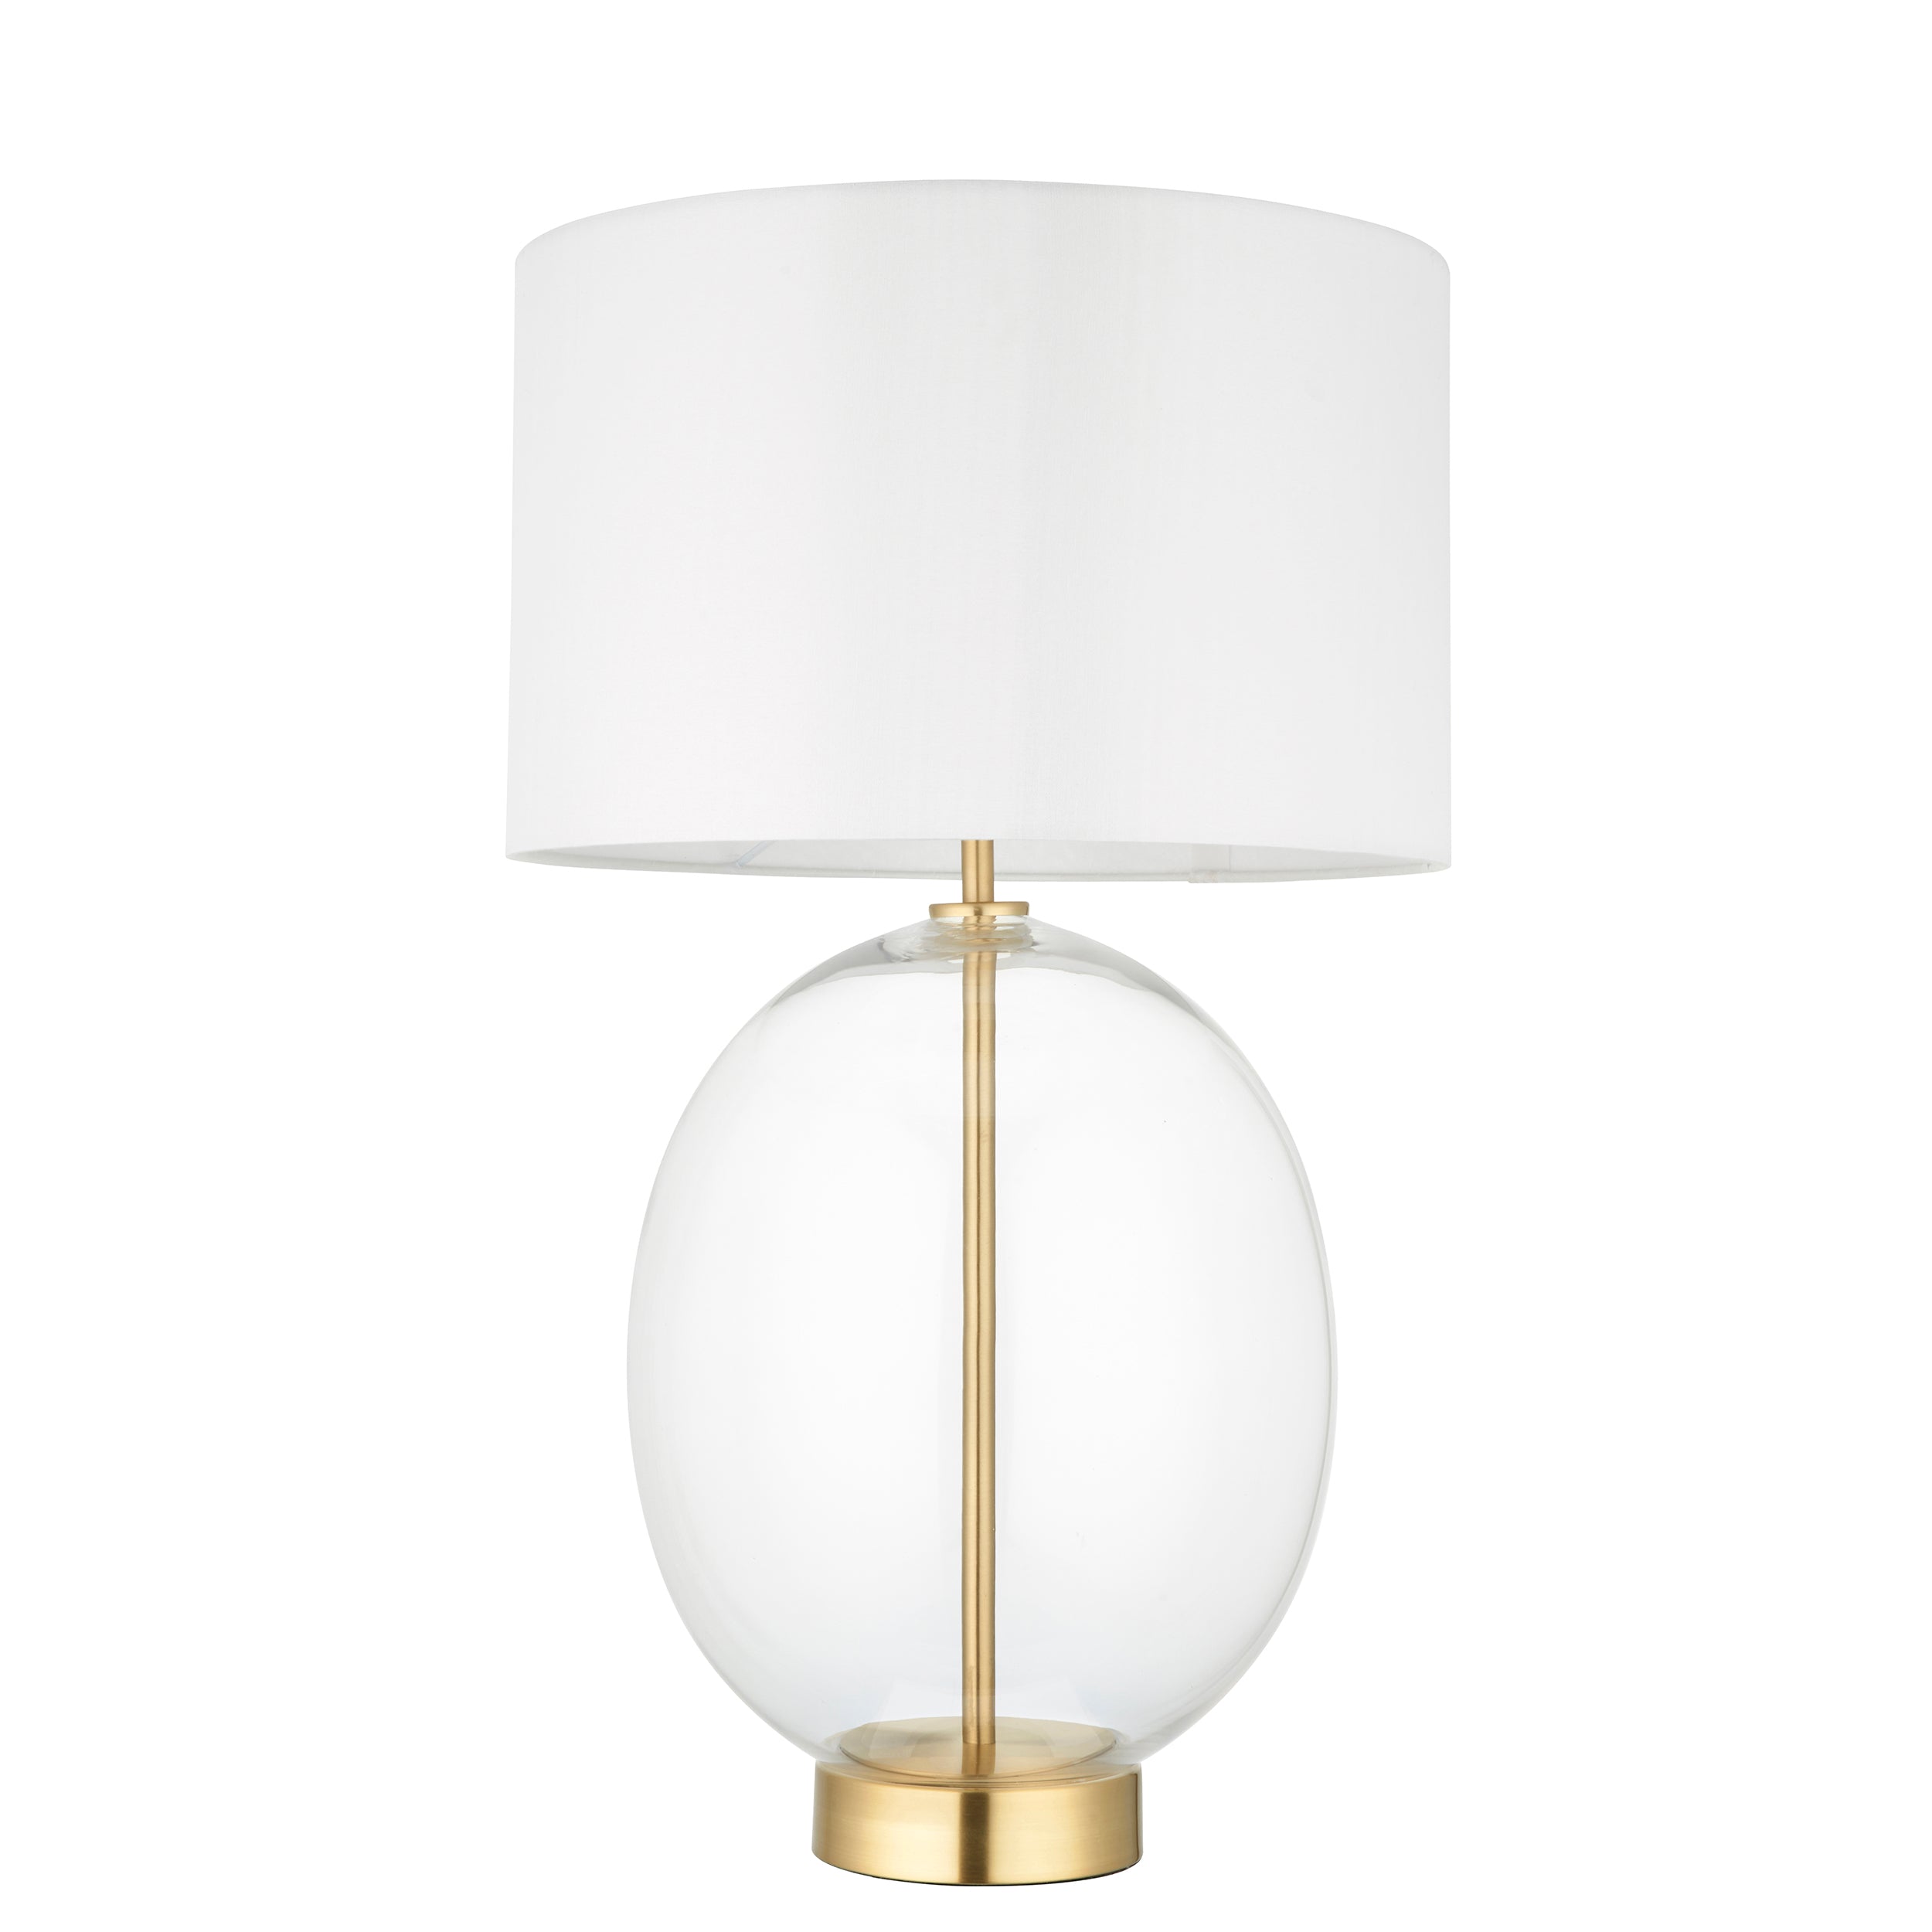 Lightologist Satin brass plate & clear glass with vintage white fabric Complete Table Light